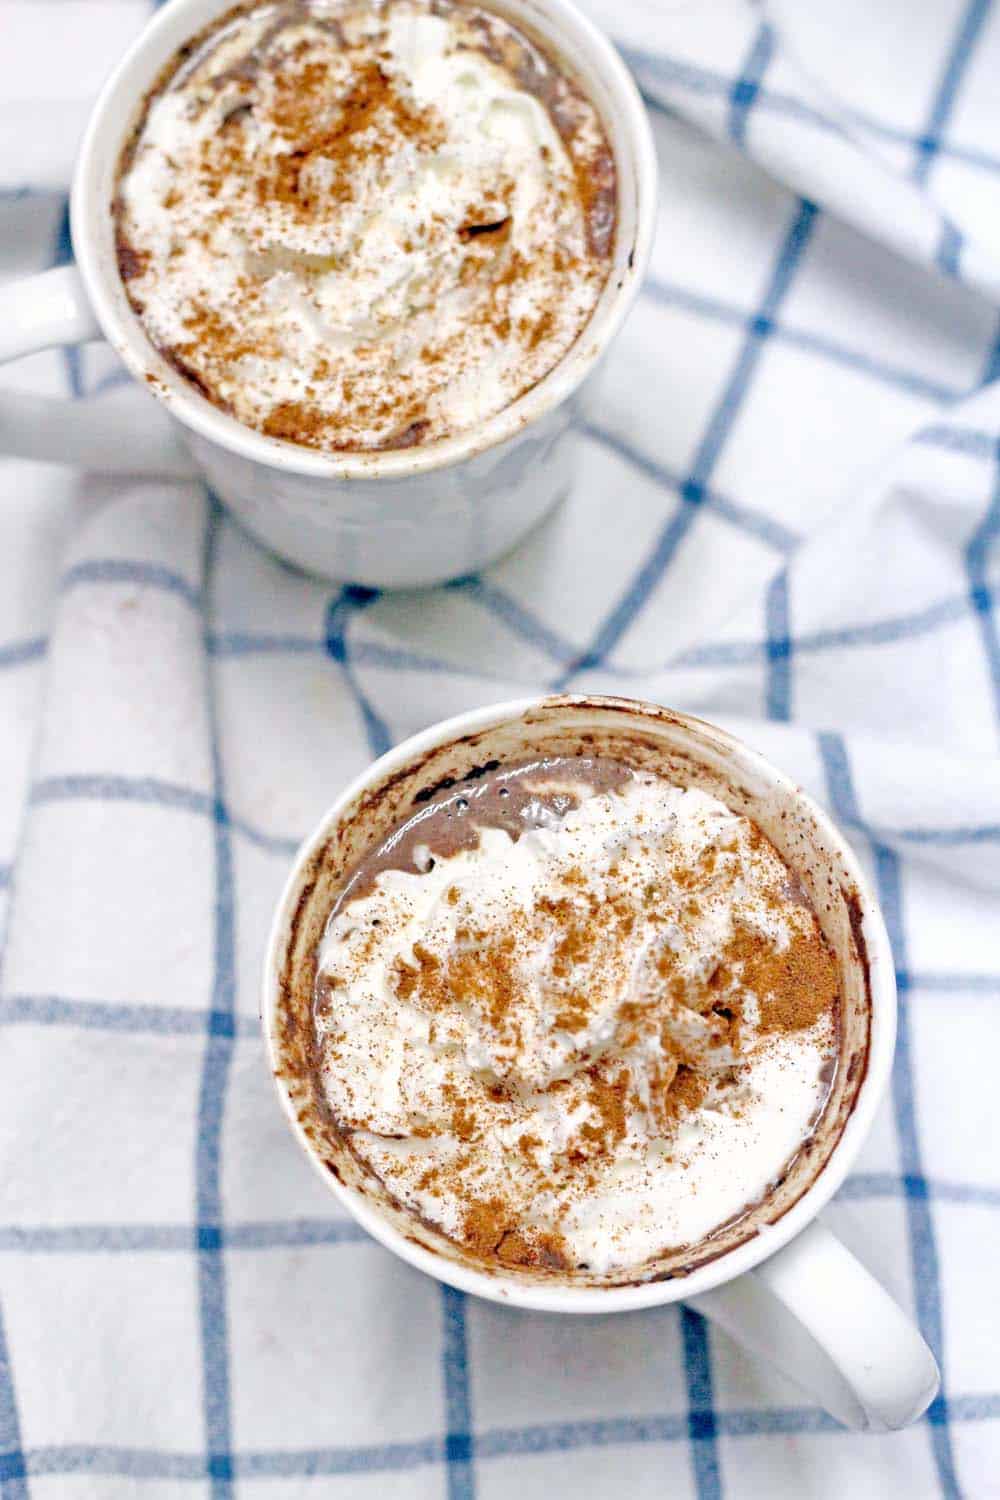 Spicy Mexican Maple and Molasses Hot Chocolate | This hot chocolate has no refined sugar and is smooth, warm, slightly spicy, and decadent with a pinch of cinnamon and cayenne pepper. Sweetened with molasses and maple syrup. SO COZY!